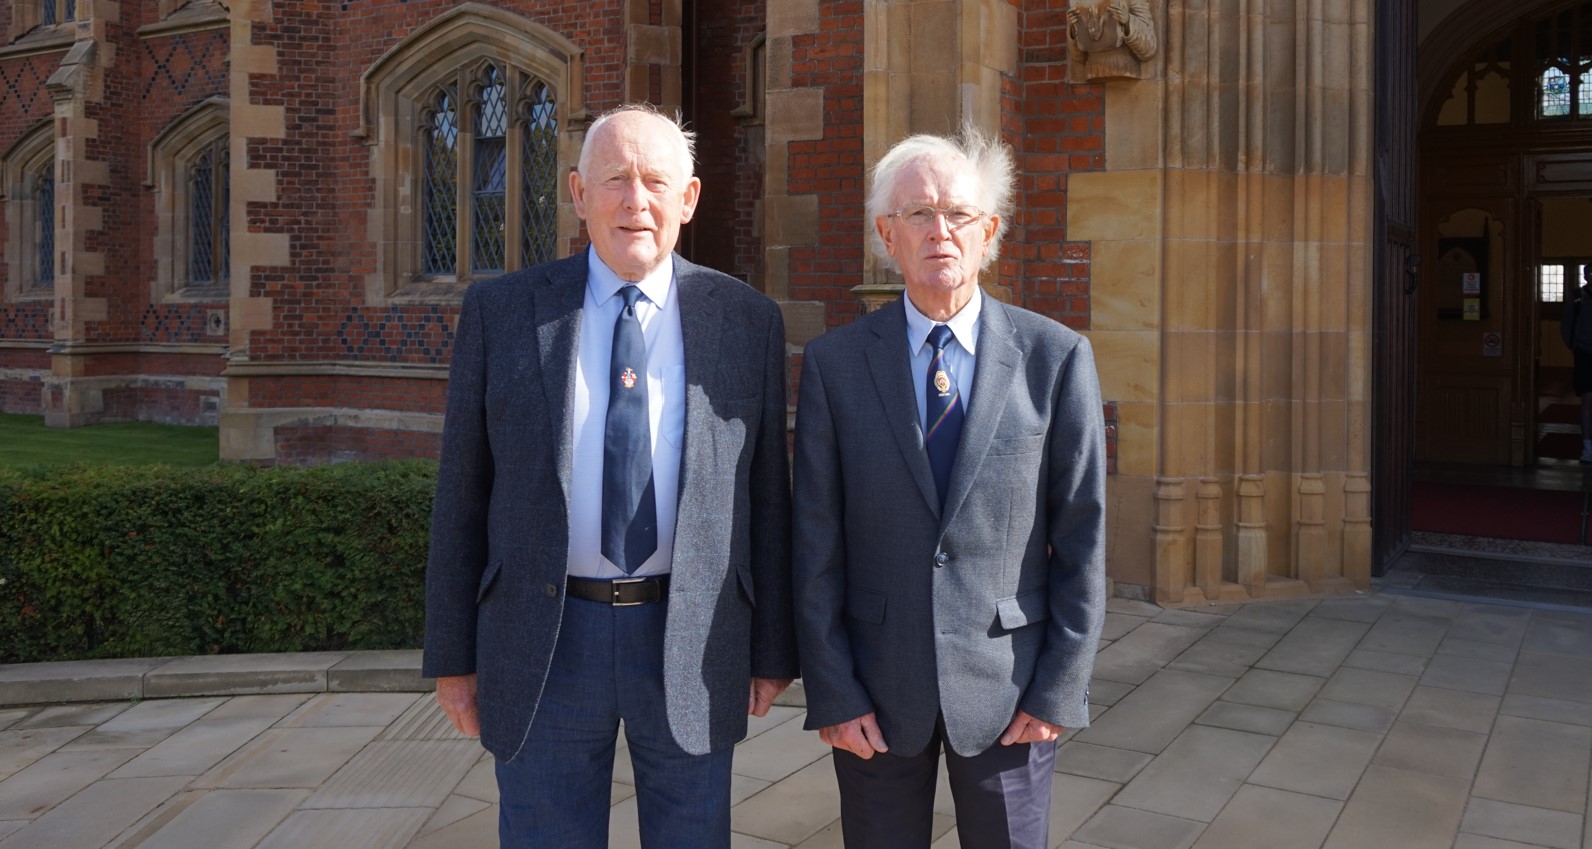 Brian Hall (left) and Robin Shanks, in front of Lanyon Building